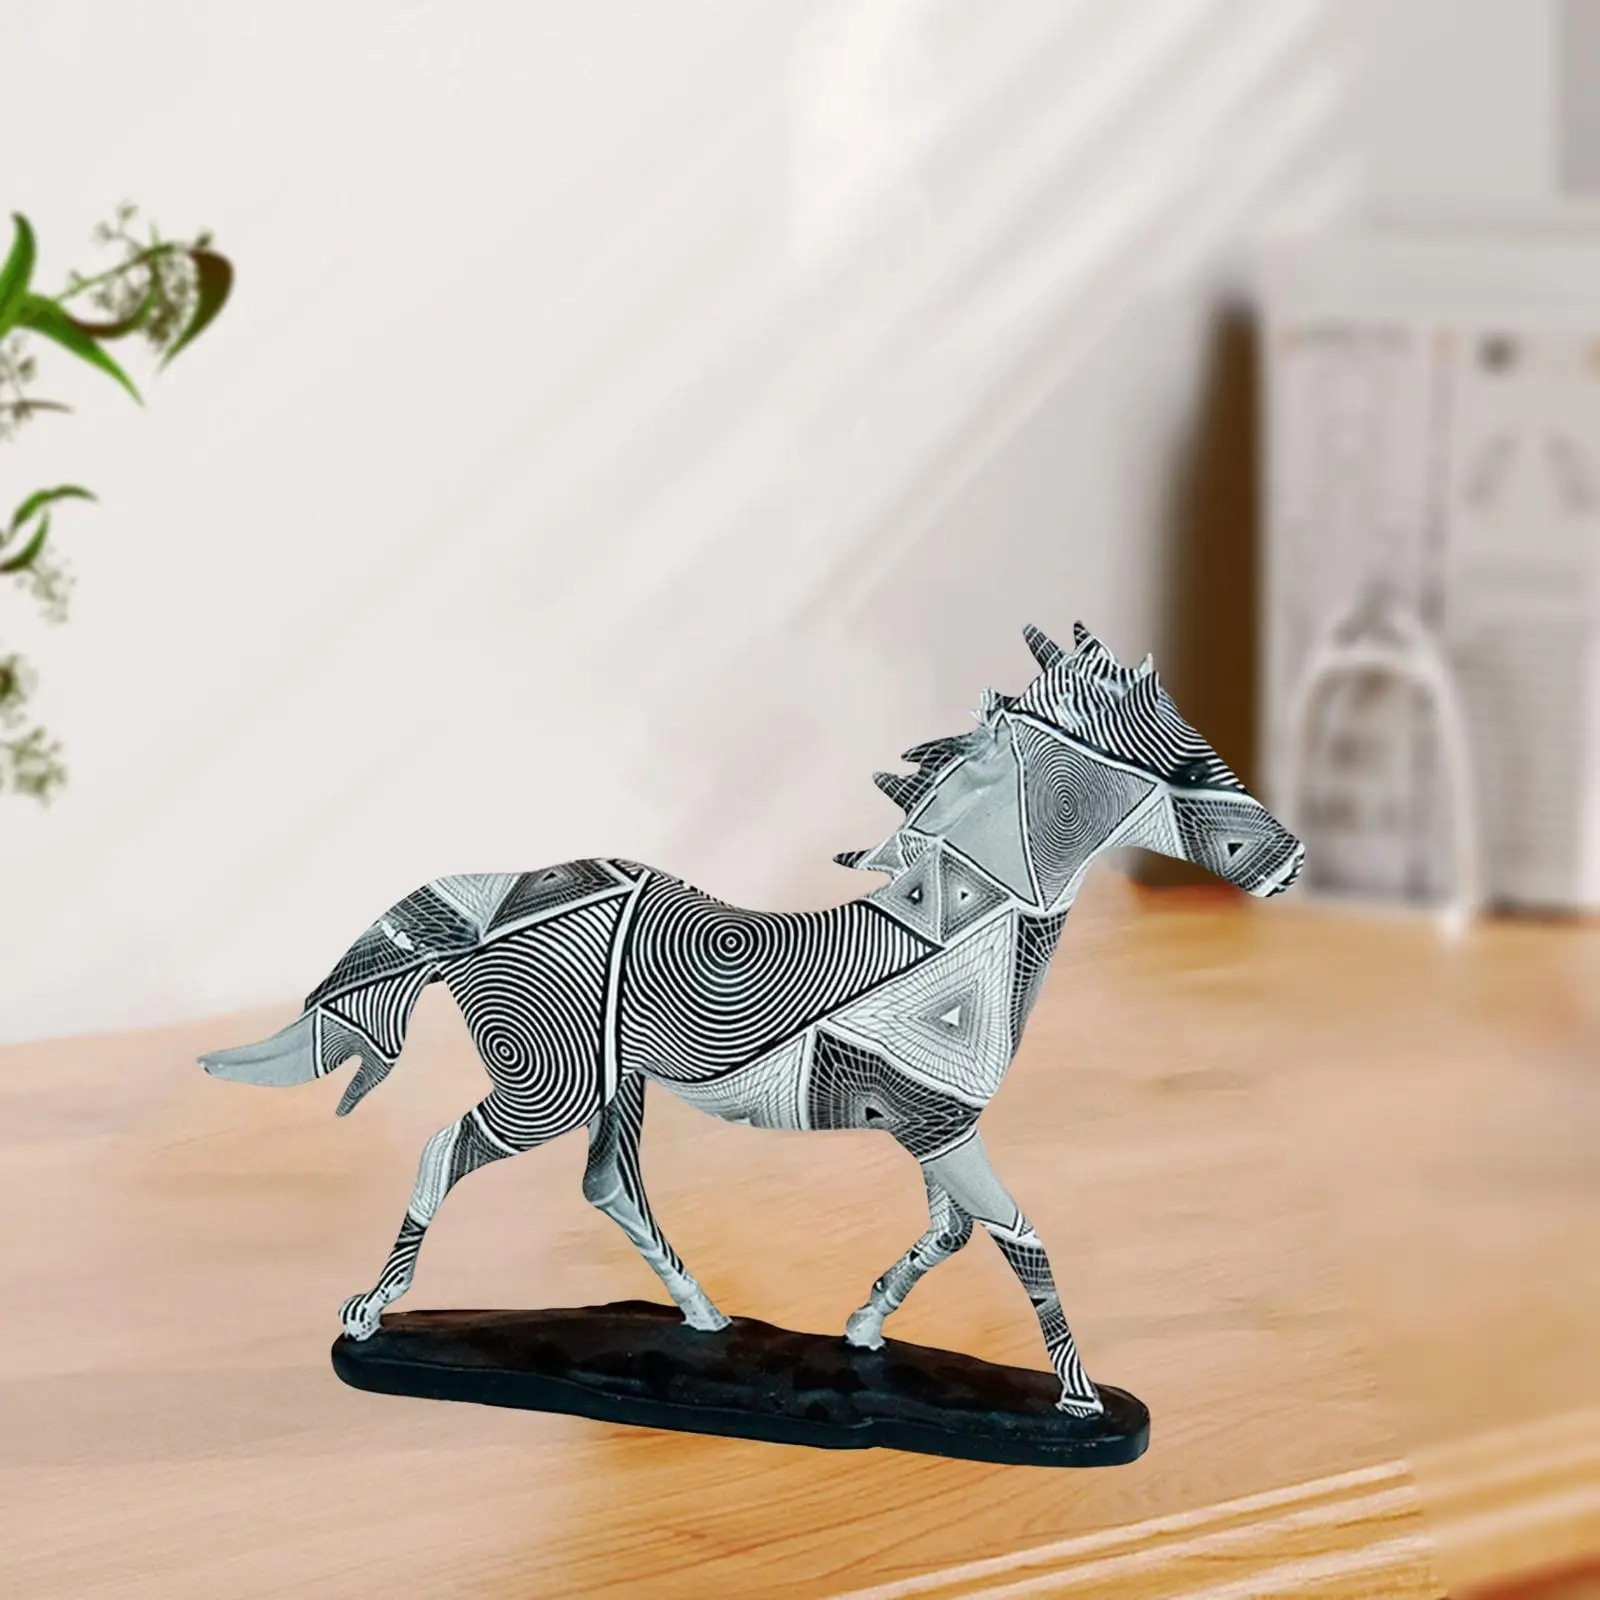 Resin Figurines Sculptures Sill Office Tabletop Decors Cabinet Horse Statues